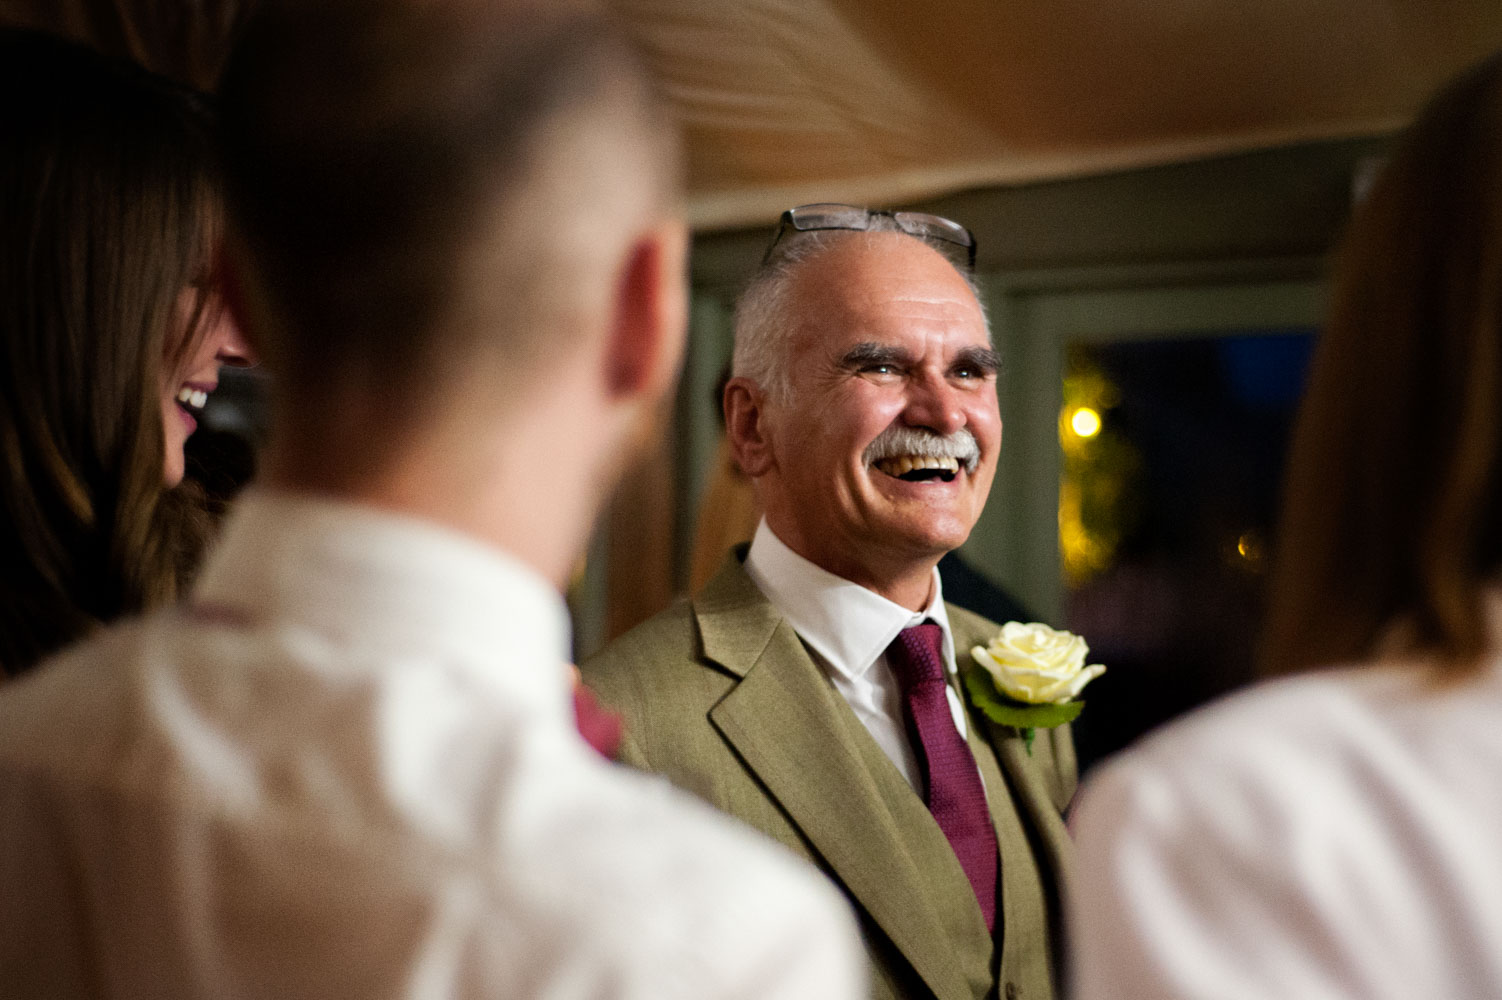 Father of the bride at Pangdean Old Barn wedding reception by Brighton documentary wedding photographer James Robertshaw